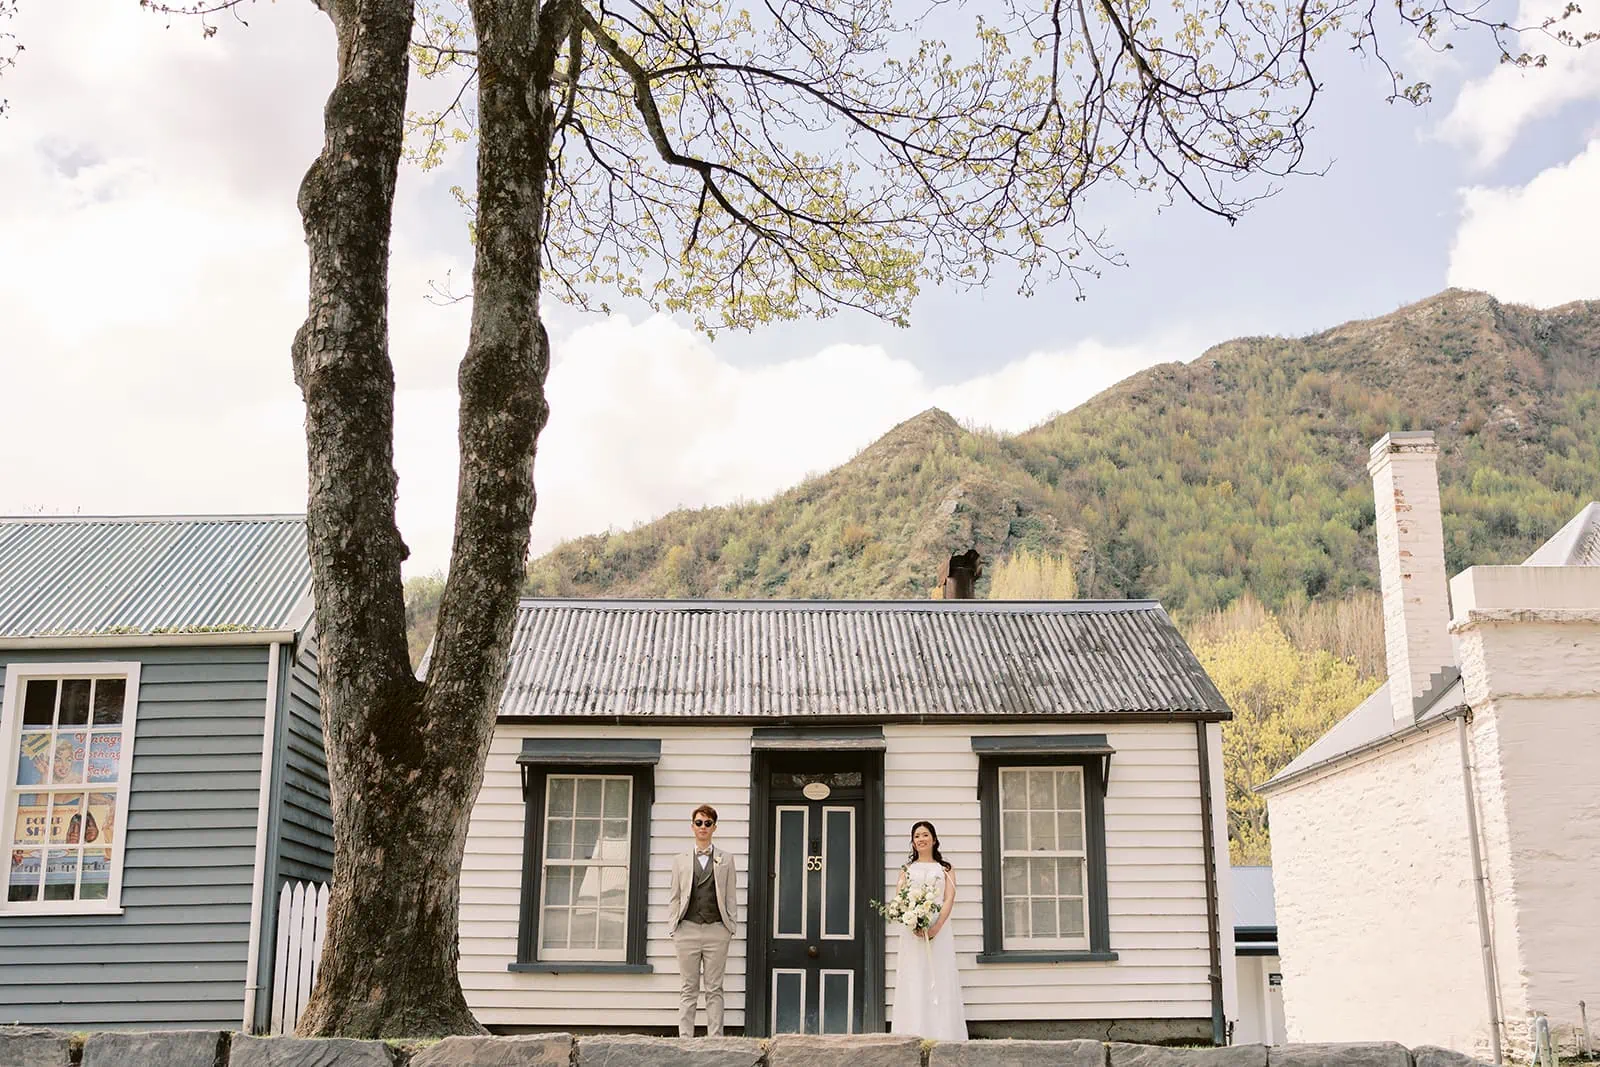 Queenstown New Zealand Elopement Wedding Photographer - A bride and groom standing in front of a house in Queenstown during the summer.